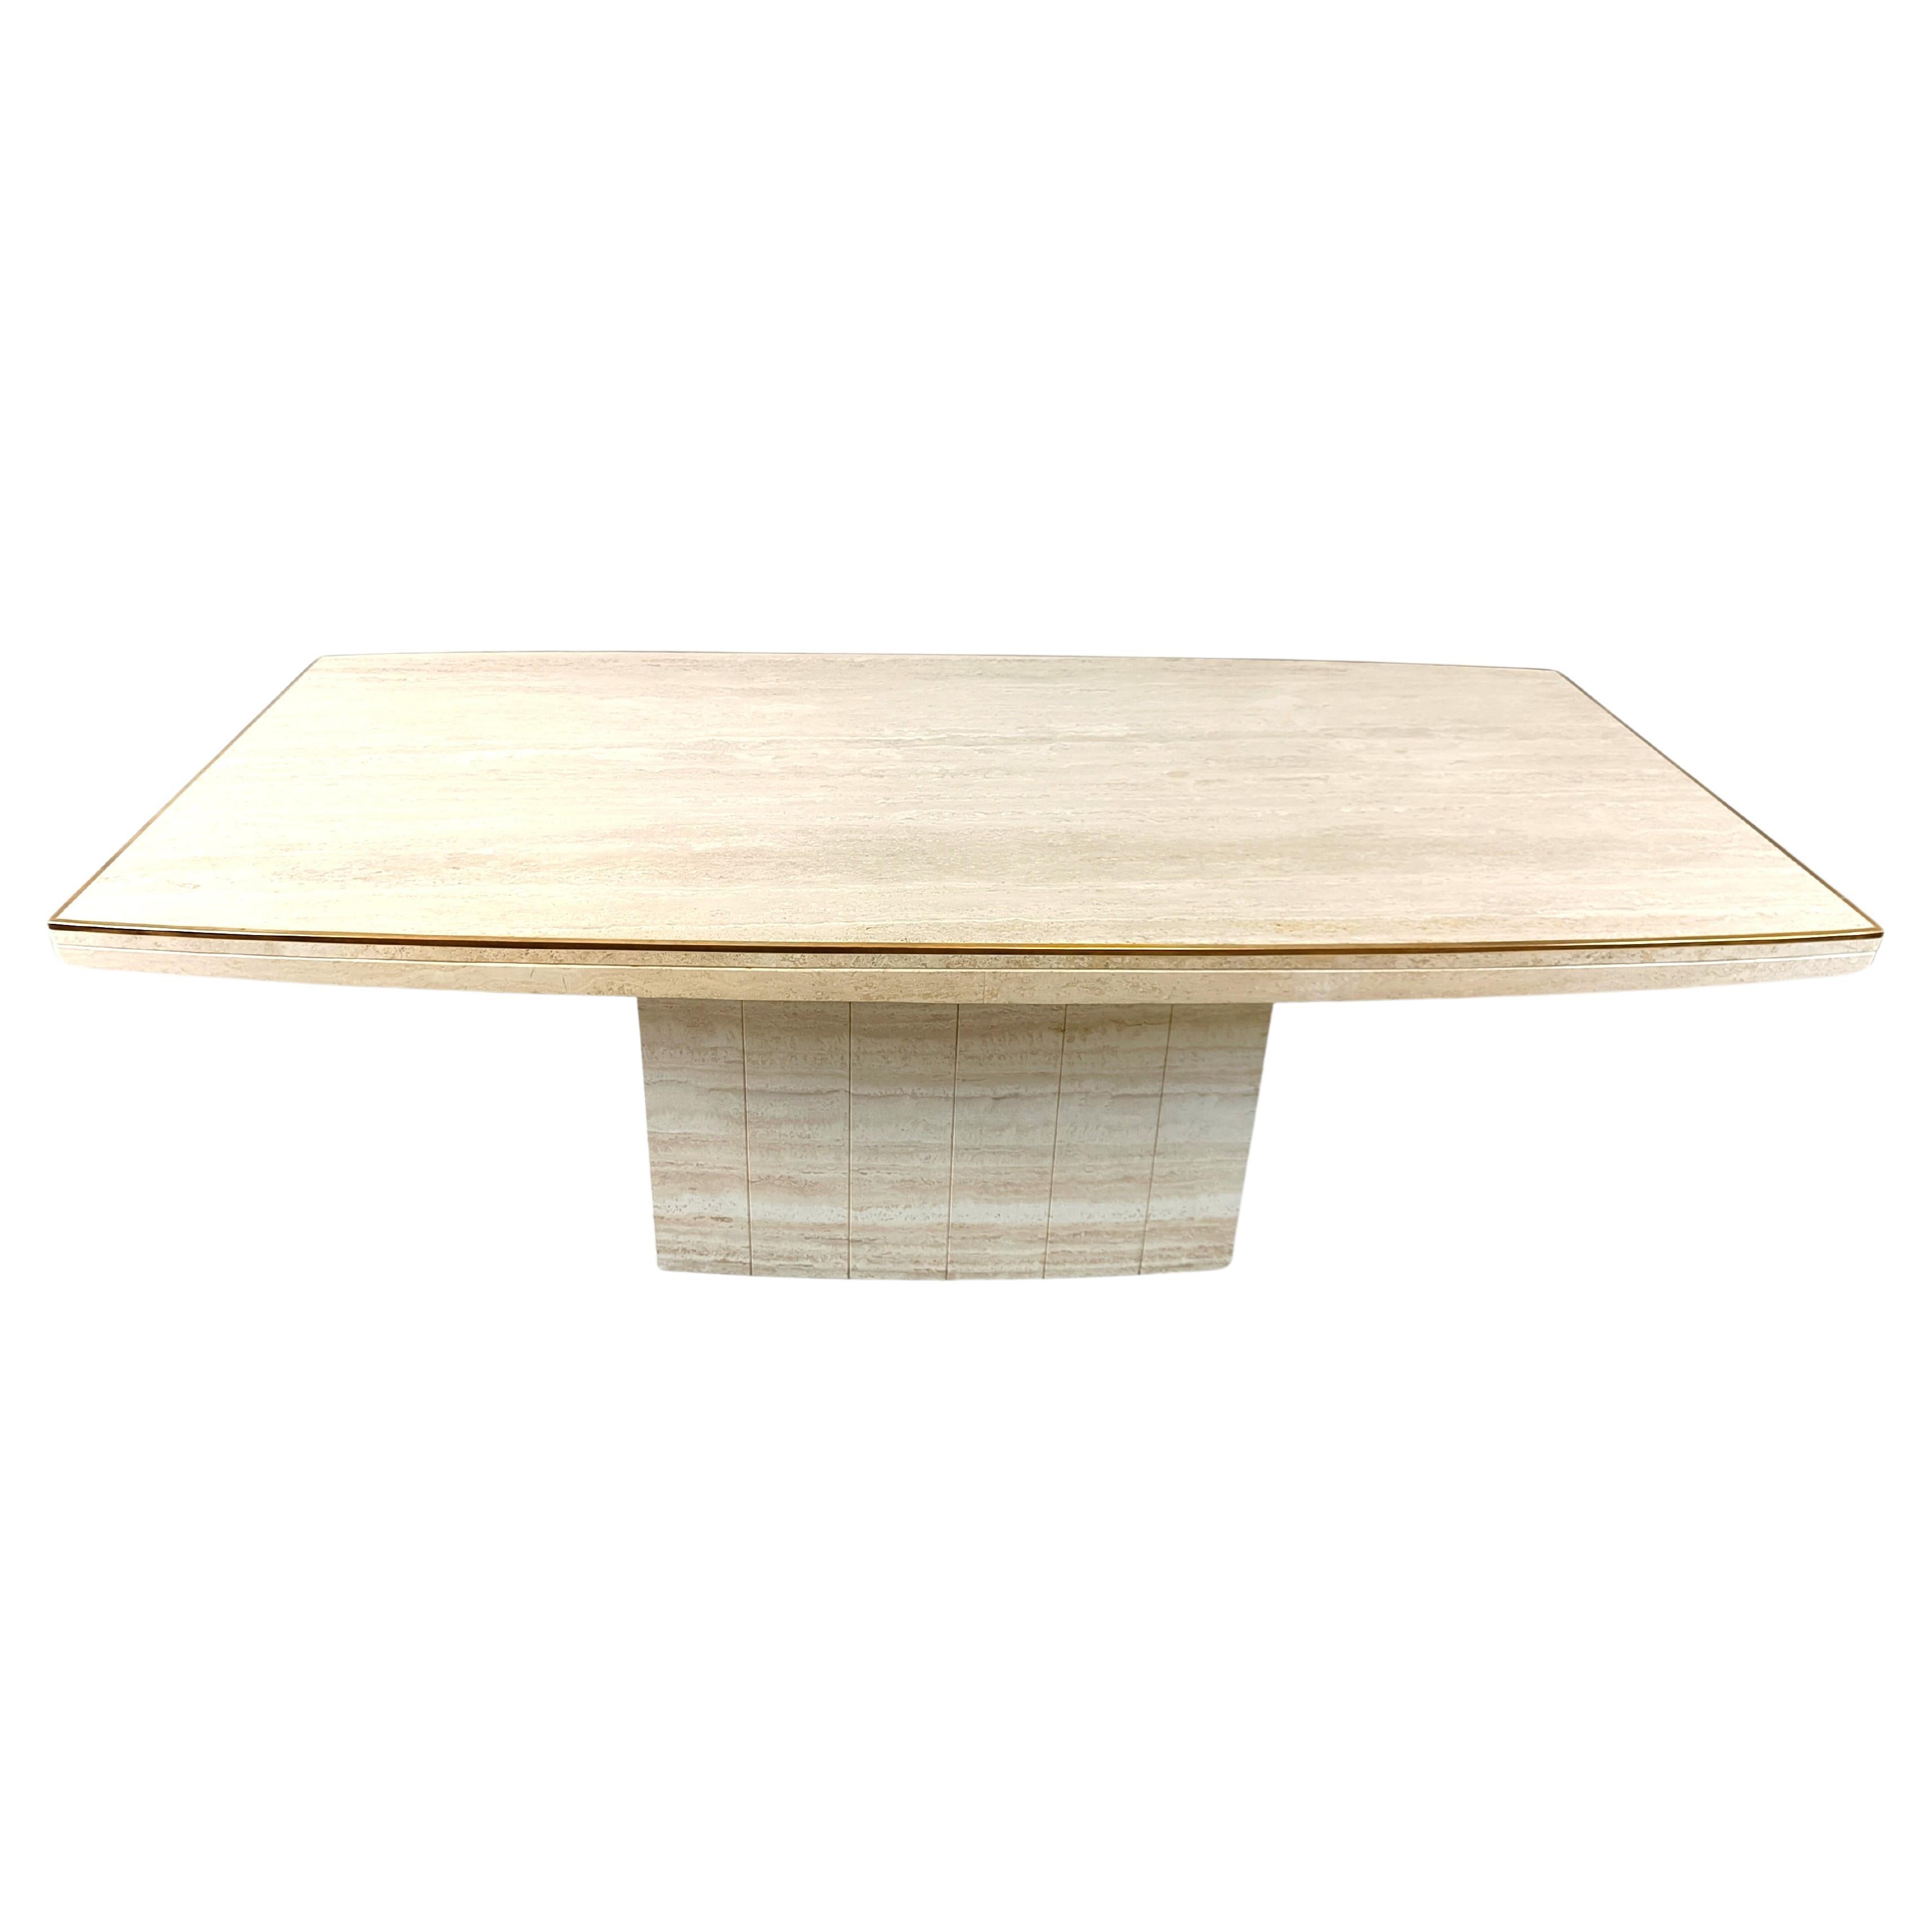 Travertine and brass dining table by Jean Charles, 1970s